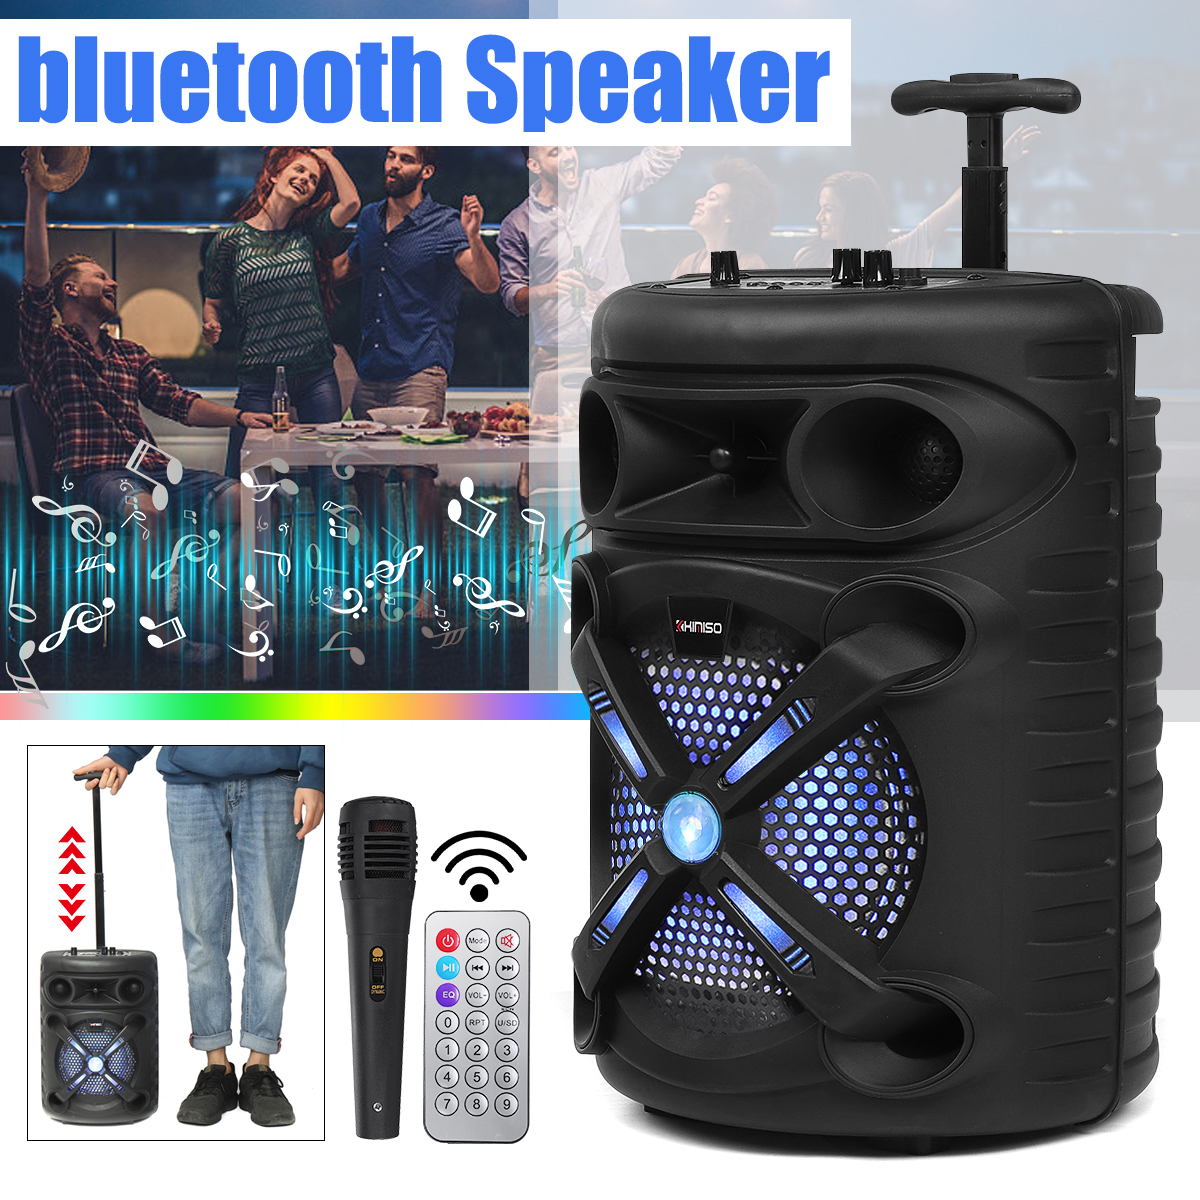 8-inch-20W-High-Power-bluetooth-Sound-Square-Loud-Speaker-3000mAh-Outdoor-Singing-Subwoofer-with-HD--1941507-1